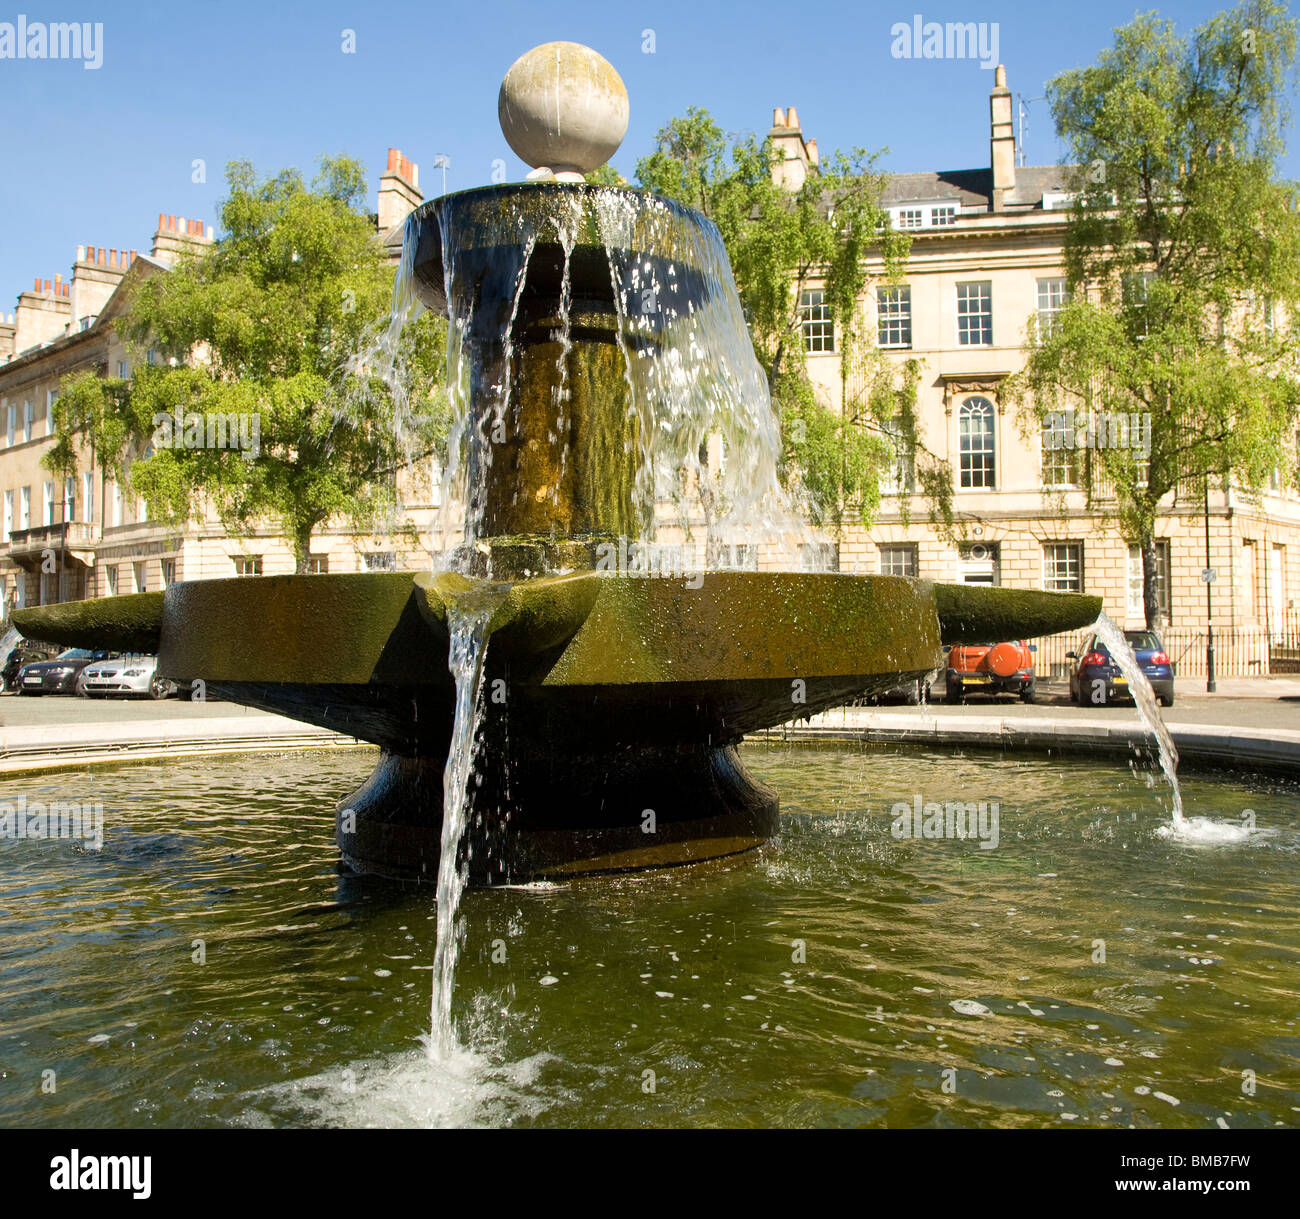 Fountain, Great Pulteney Street and Laura Place, Bath Stock Photo